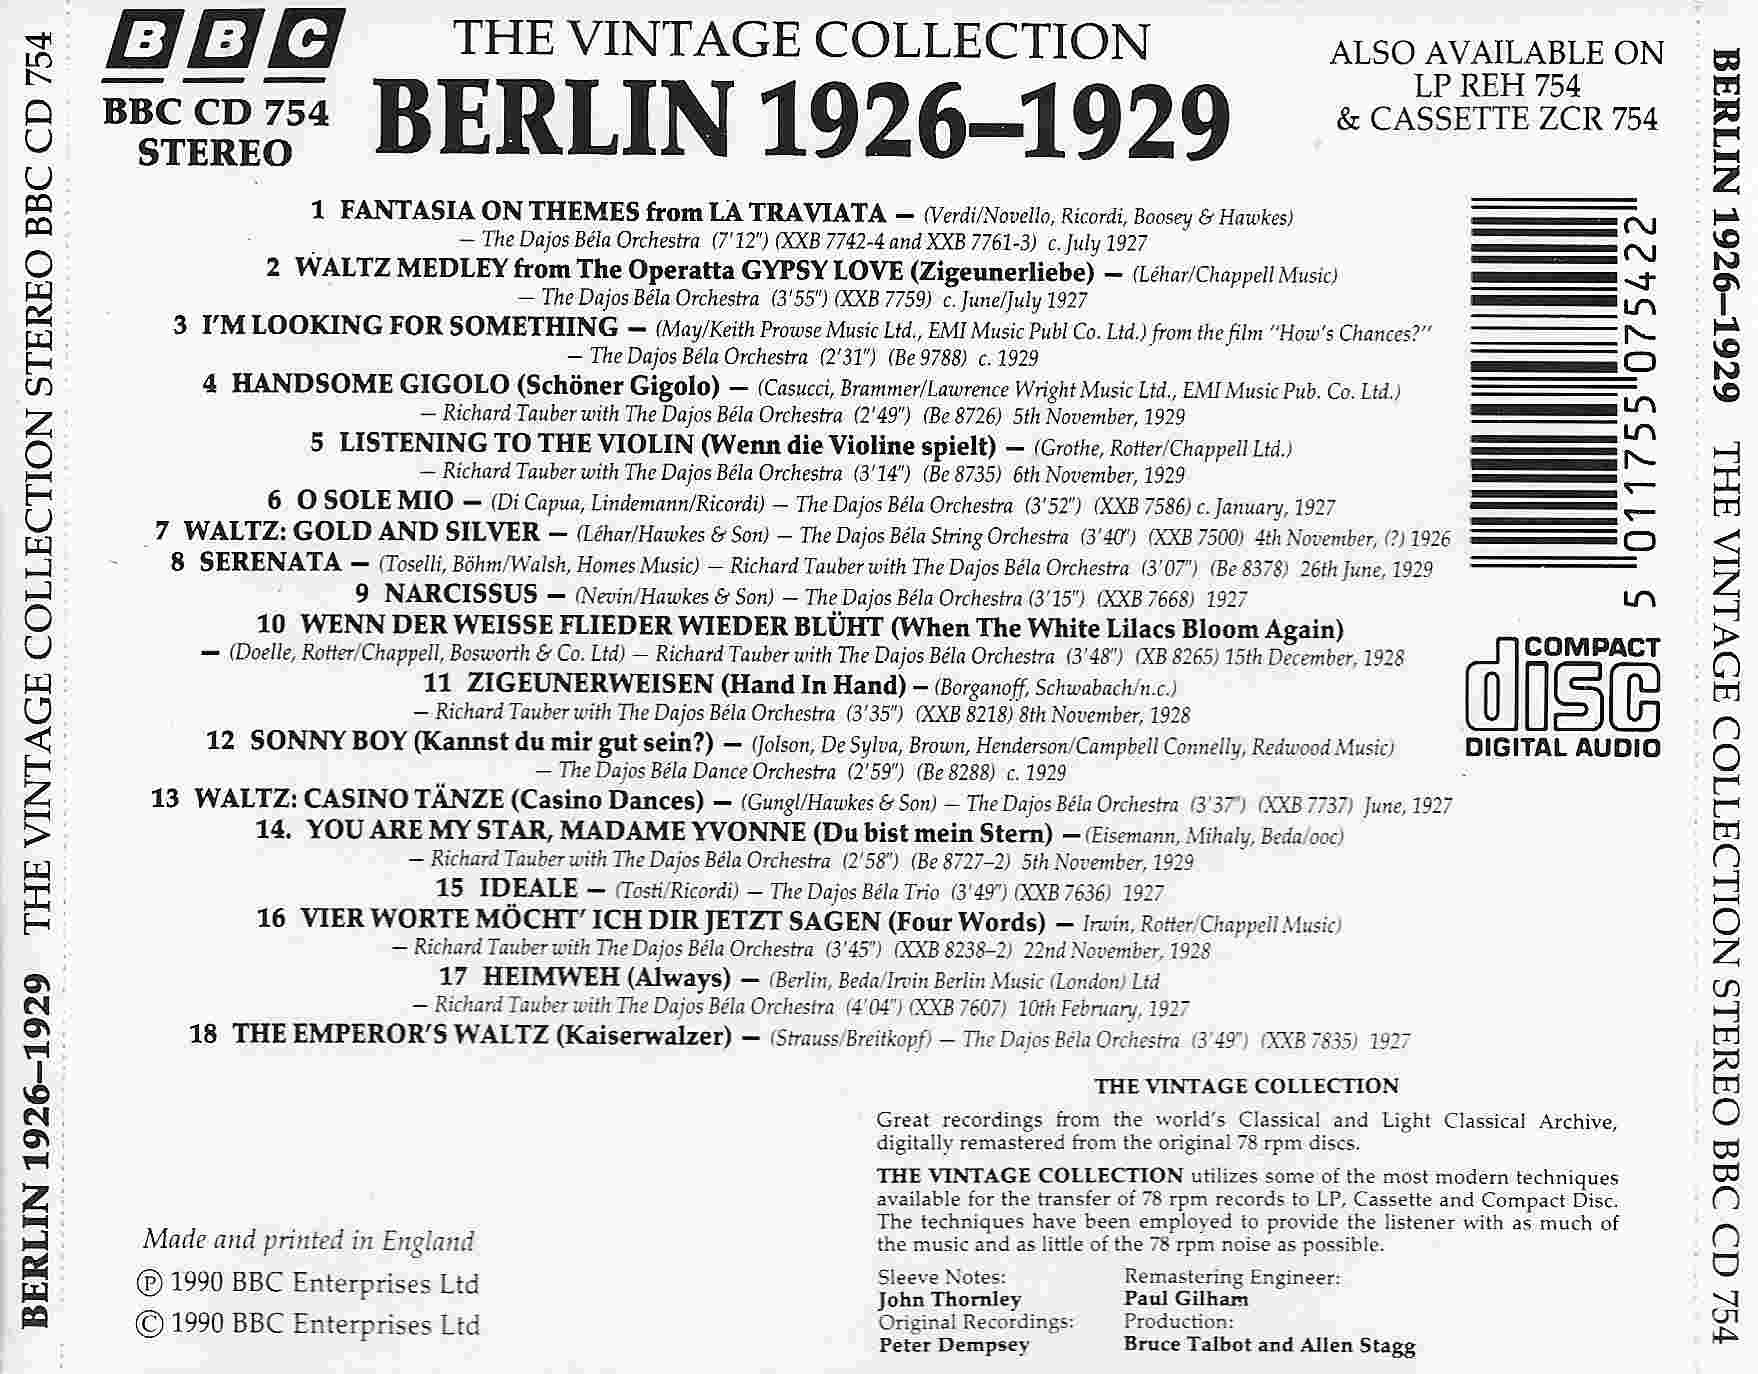 Picture of BBCCD754 The vintage collection - Berlin 1926 - 1929 by artist Various from the BBC records and Tapes library